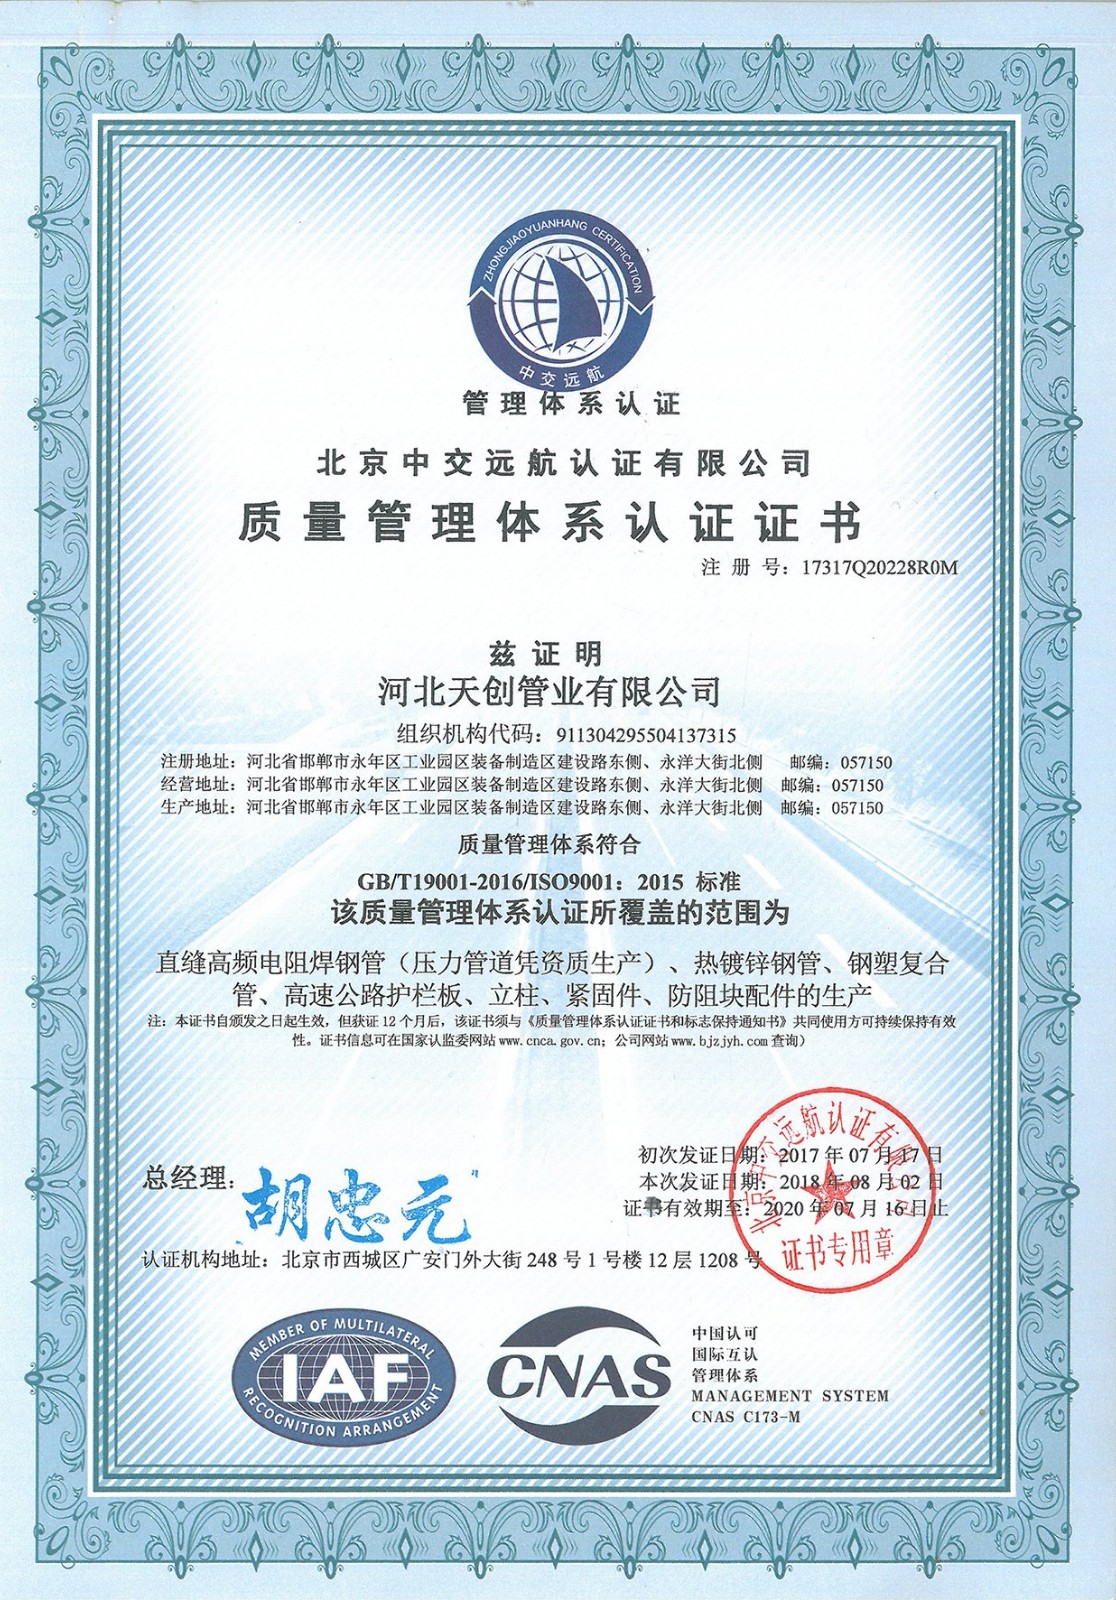 Hebei Tianchuang Pipe Co., Ltd won The Stable Quality Product and Leading Quality Enterprise Of China Steel Industry